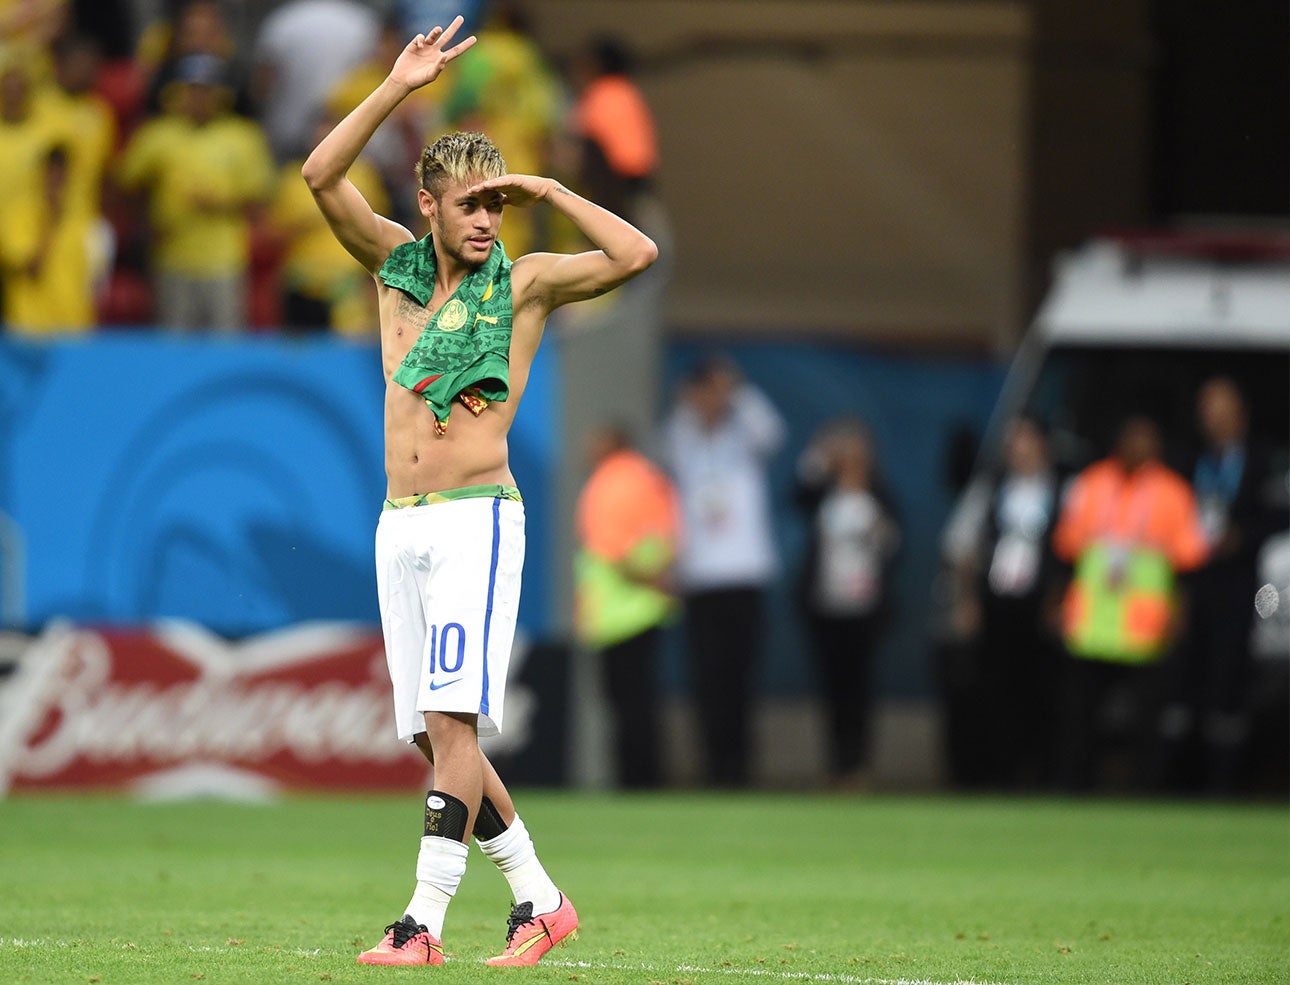 Brazil's forward Neymar leaves the pitch after a Group A football match between Cameroon and Brazil at the Mane Garrincha National Stadium in Brasilia during the 2014 FIFA World Cup on June 23, 2014.